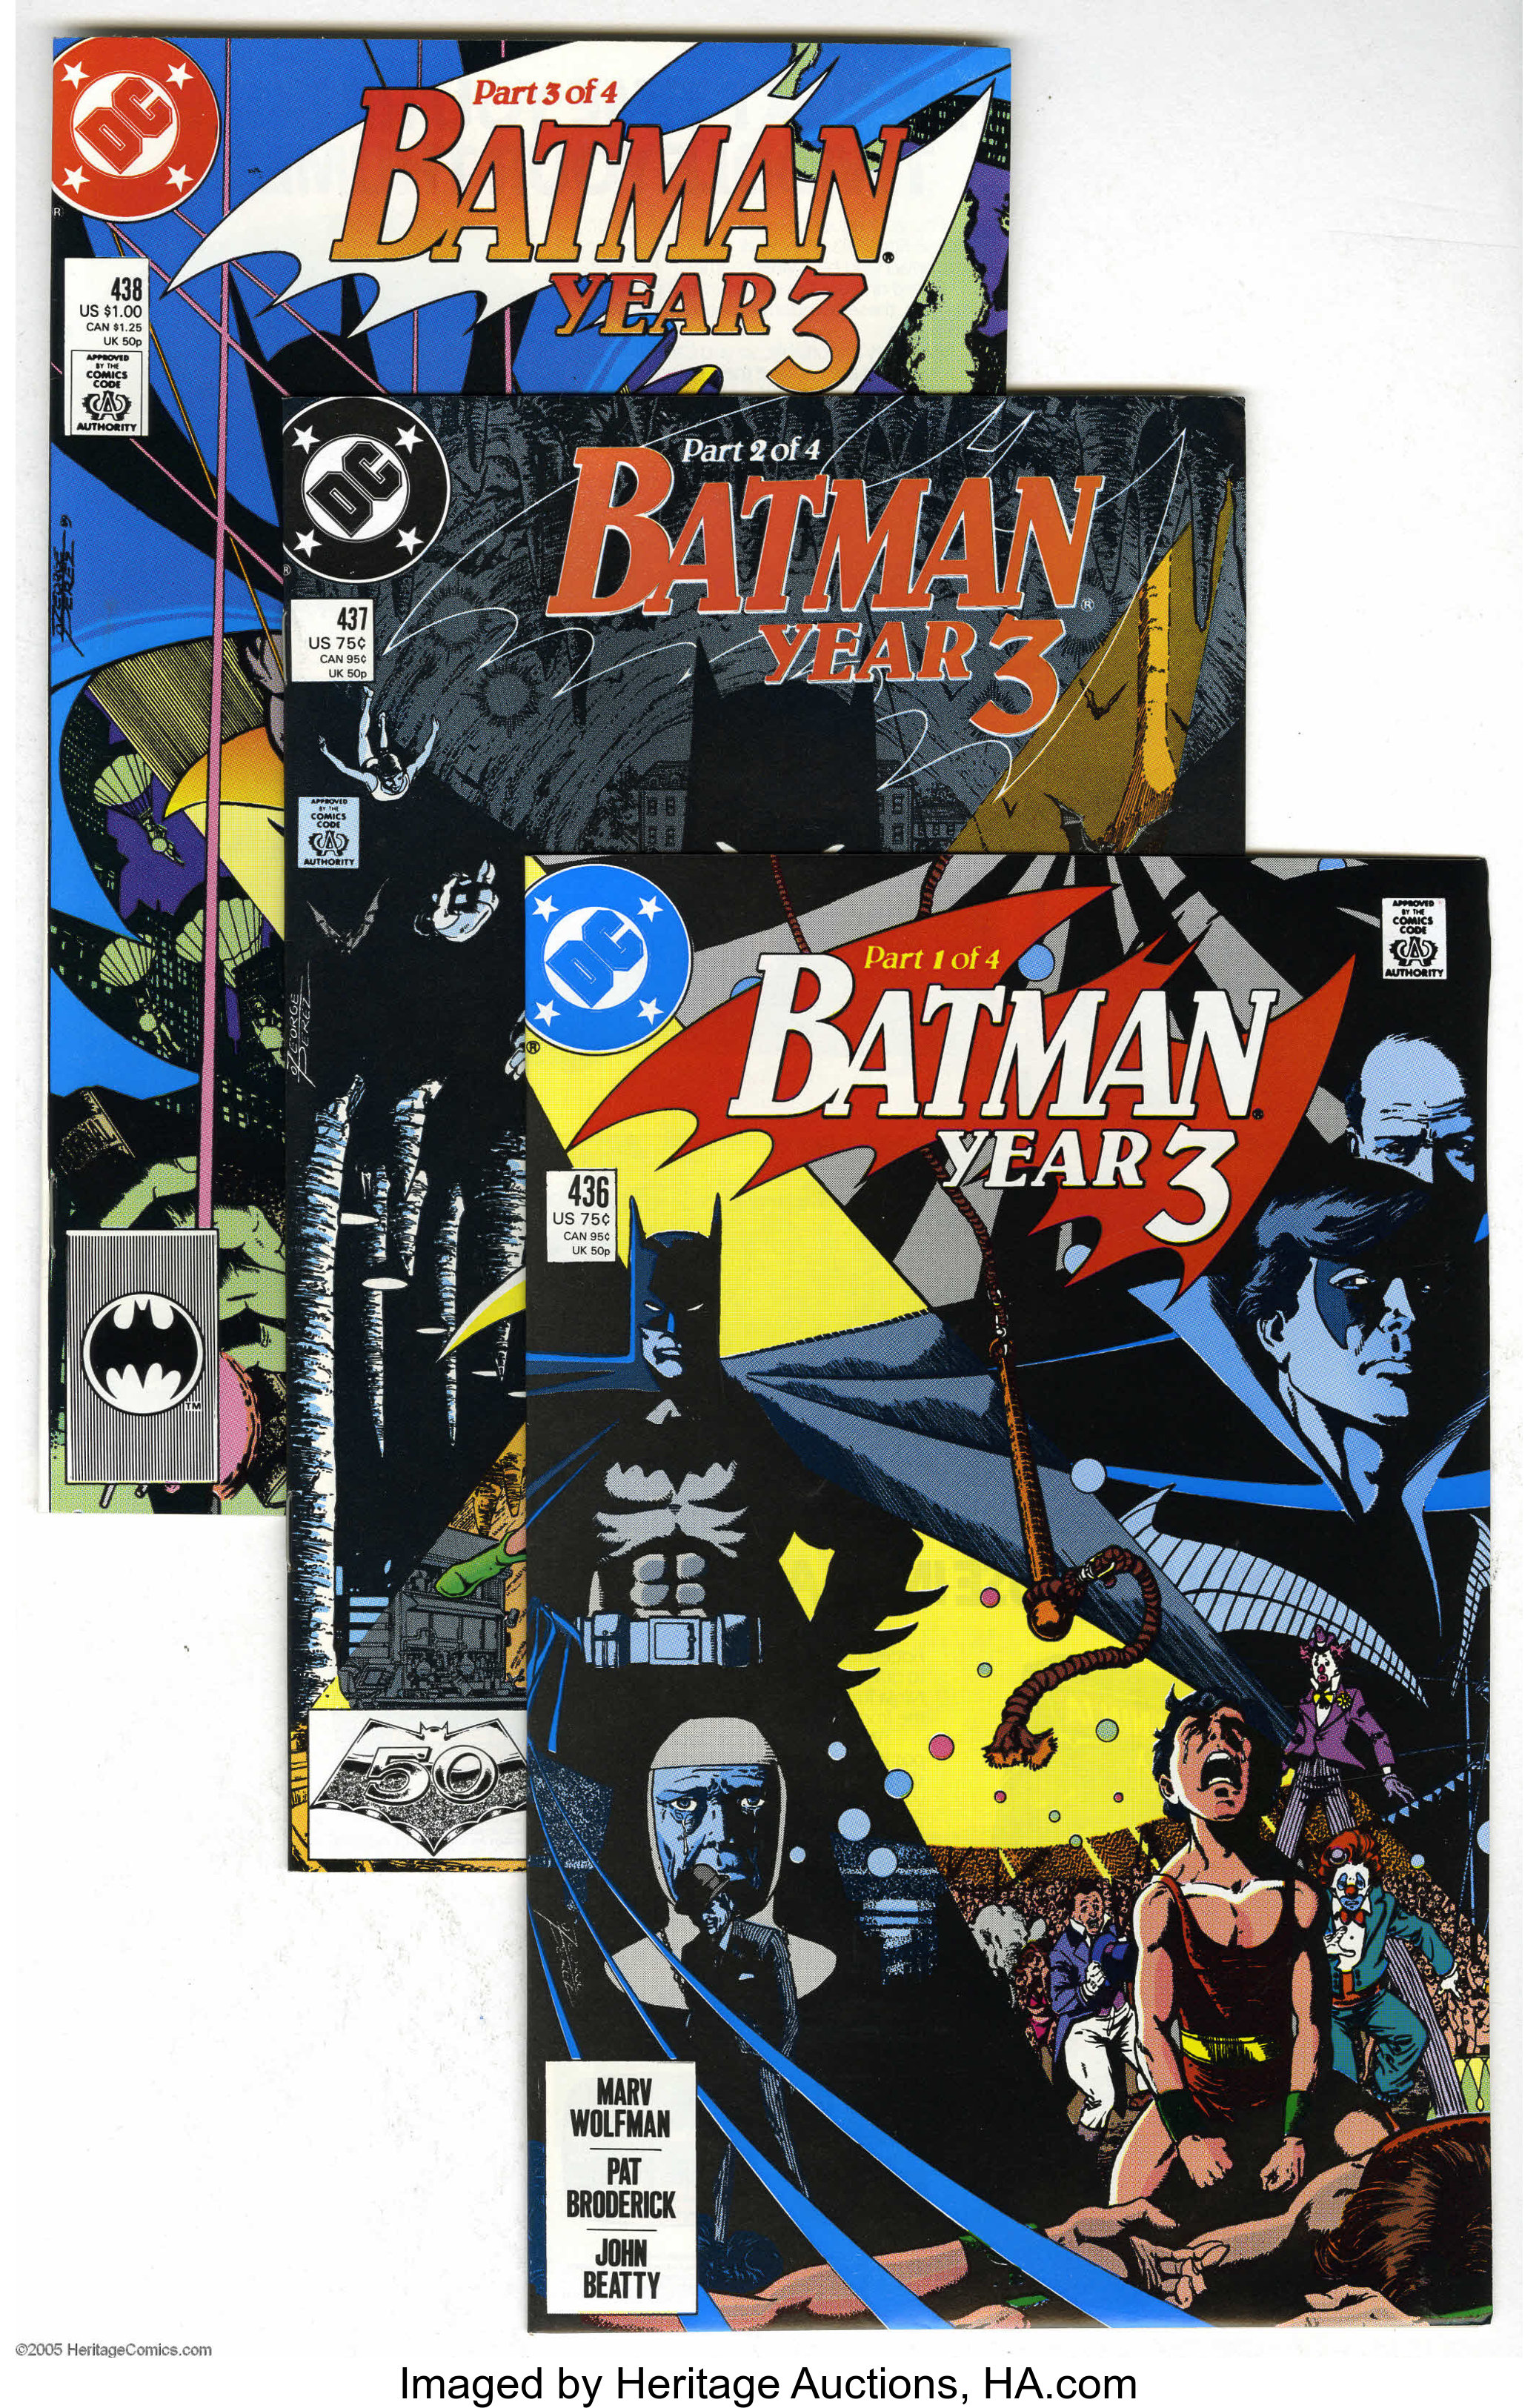 Batman #436-443, 457, 493, and Annual #13 Group (DC, 1989-93) | Lot #16380  | Heritage Auctions